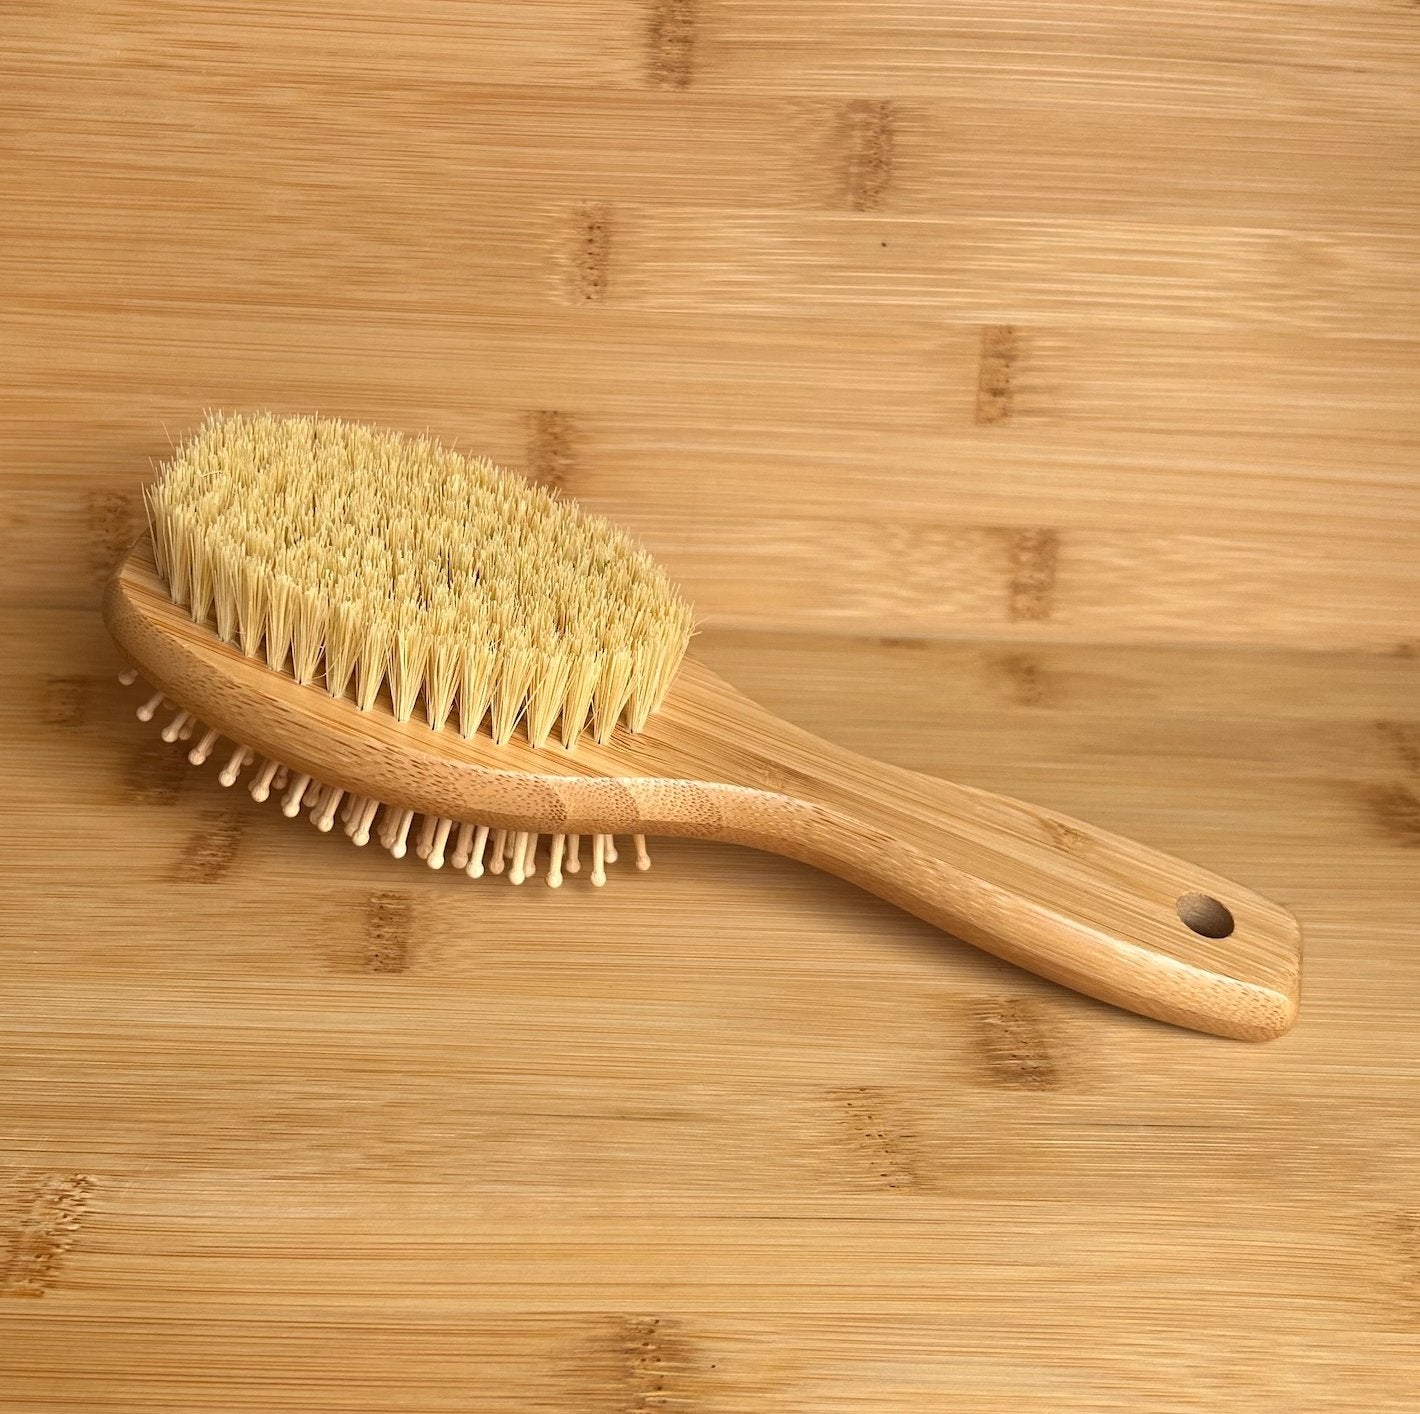 sustainable, zero waste, earth-friendly, plastic-free Double Sided Hairbrush - Bamboo Switch